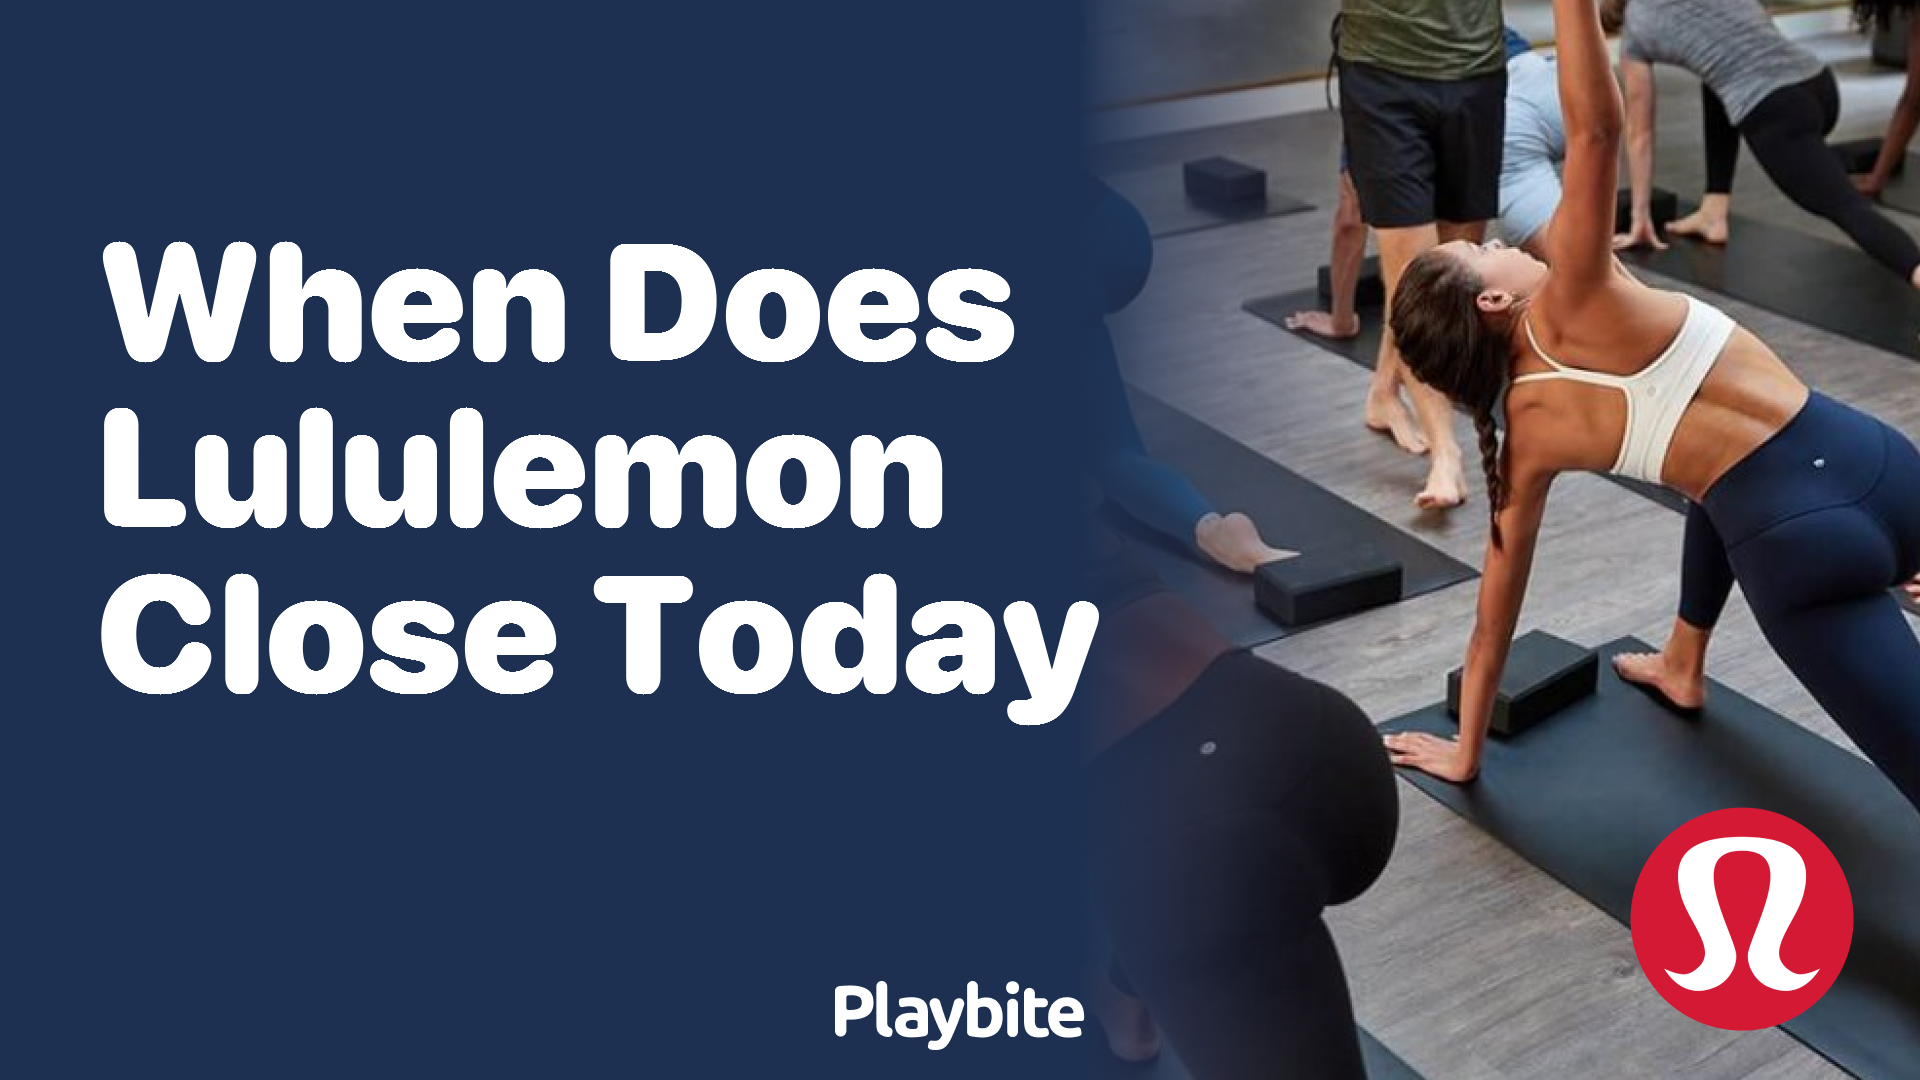 When Does Lululemon Close Today? Getting the Timing Right for Your